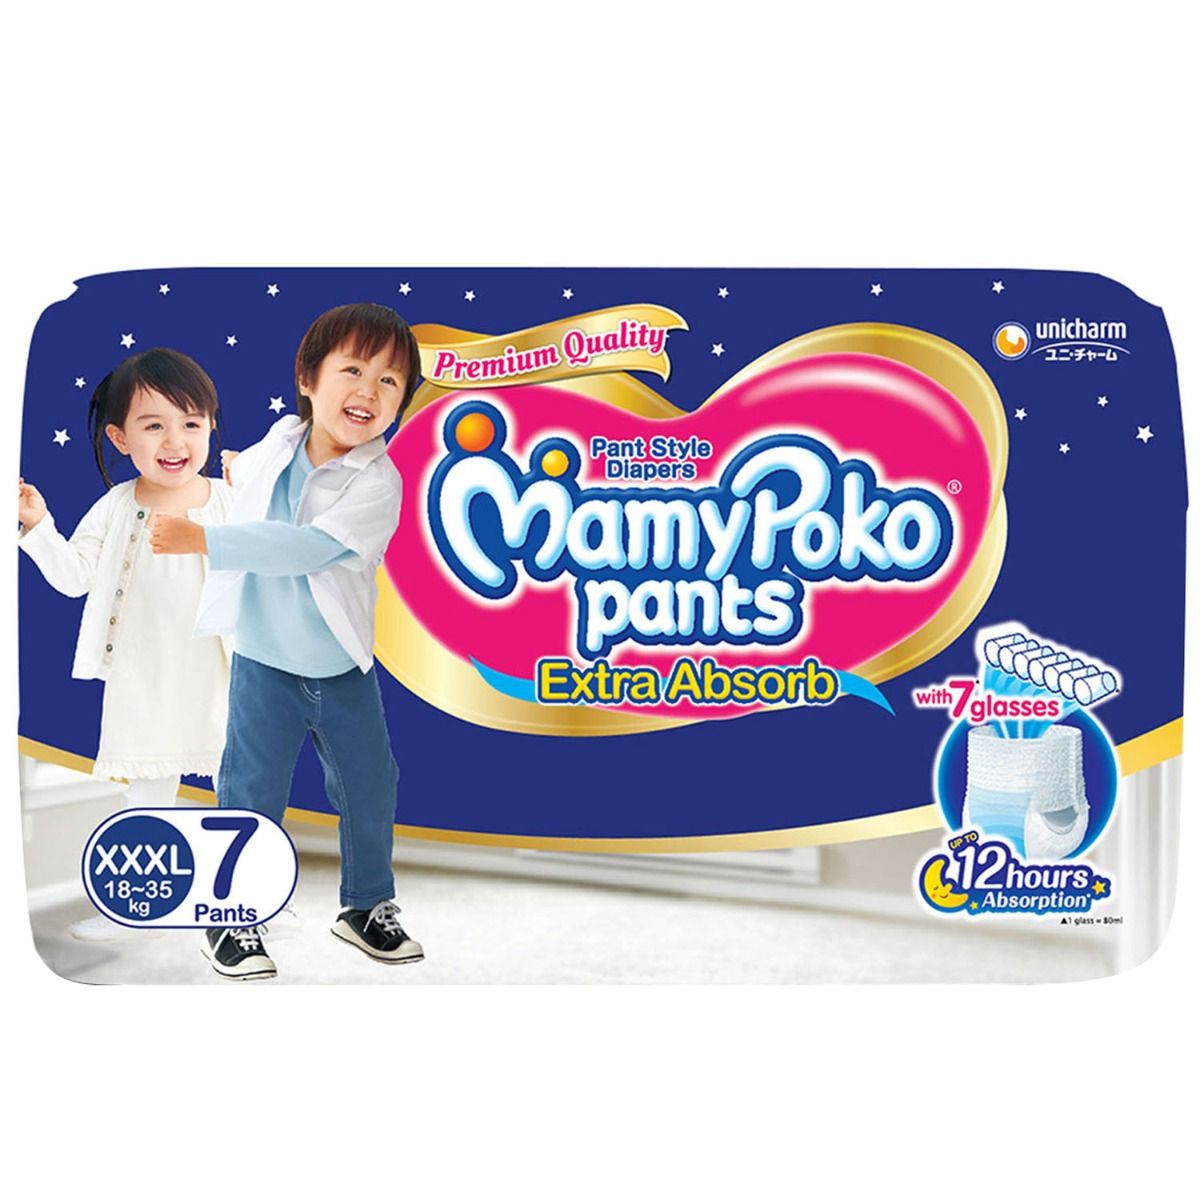 MamyPoko Extra Absorb Diaper Pants XXXL, 7 Count, Pack of 1 